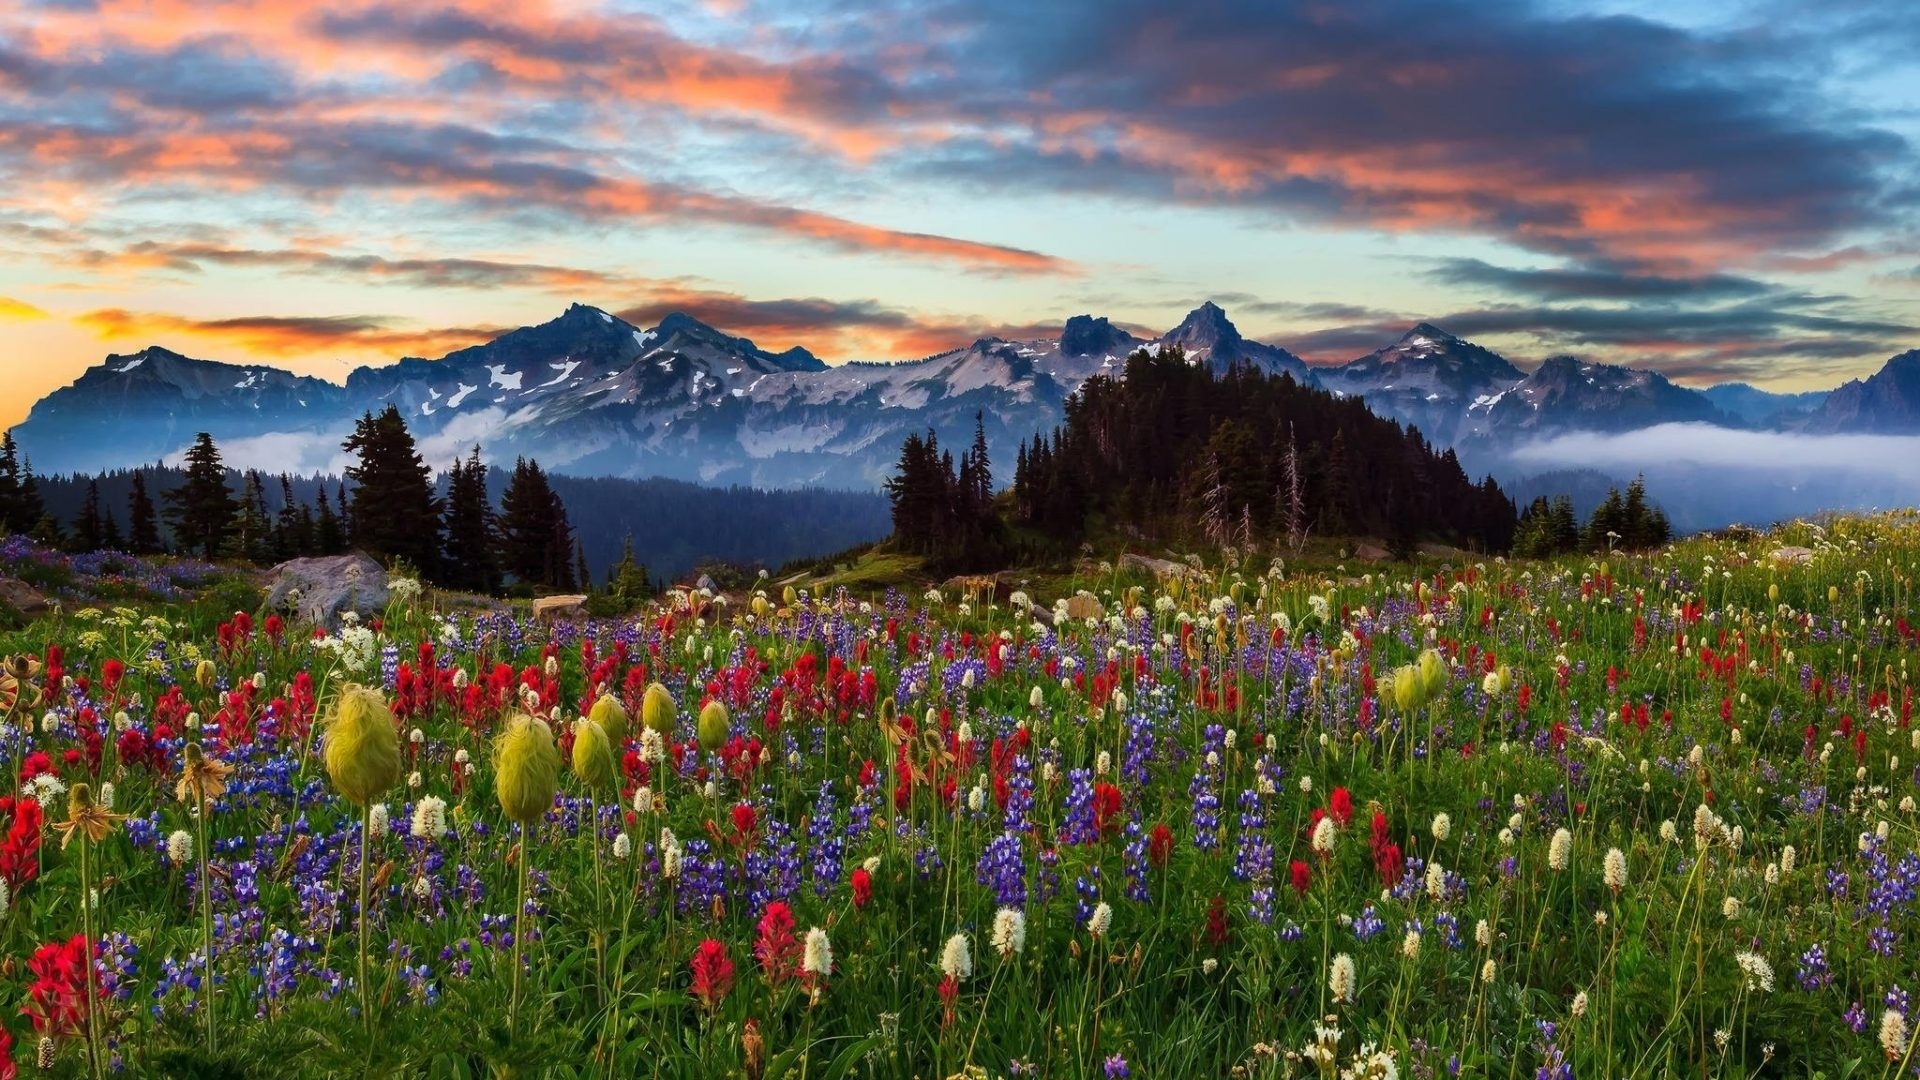 mountains, flowers, spring, park, sunset, nature, clouds Gallery HD Wallpaper